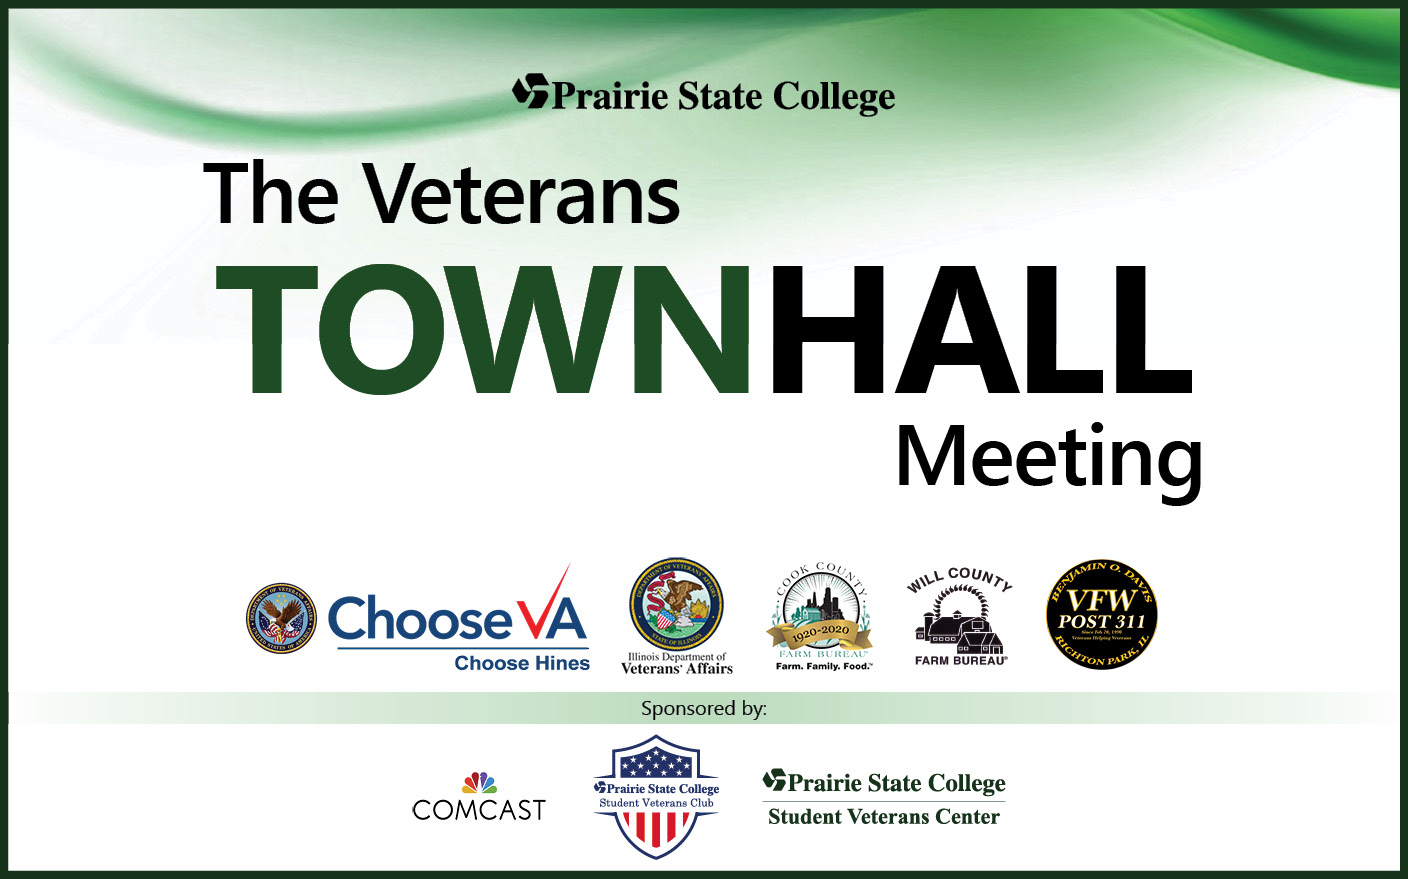 The Veterans Townhall Meeting